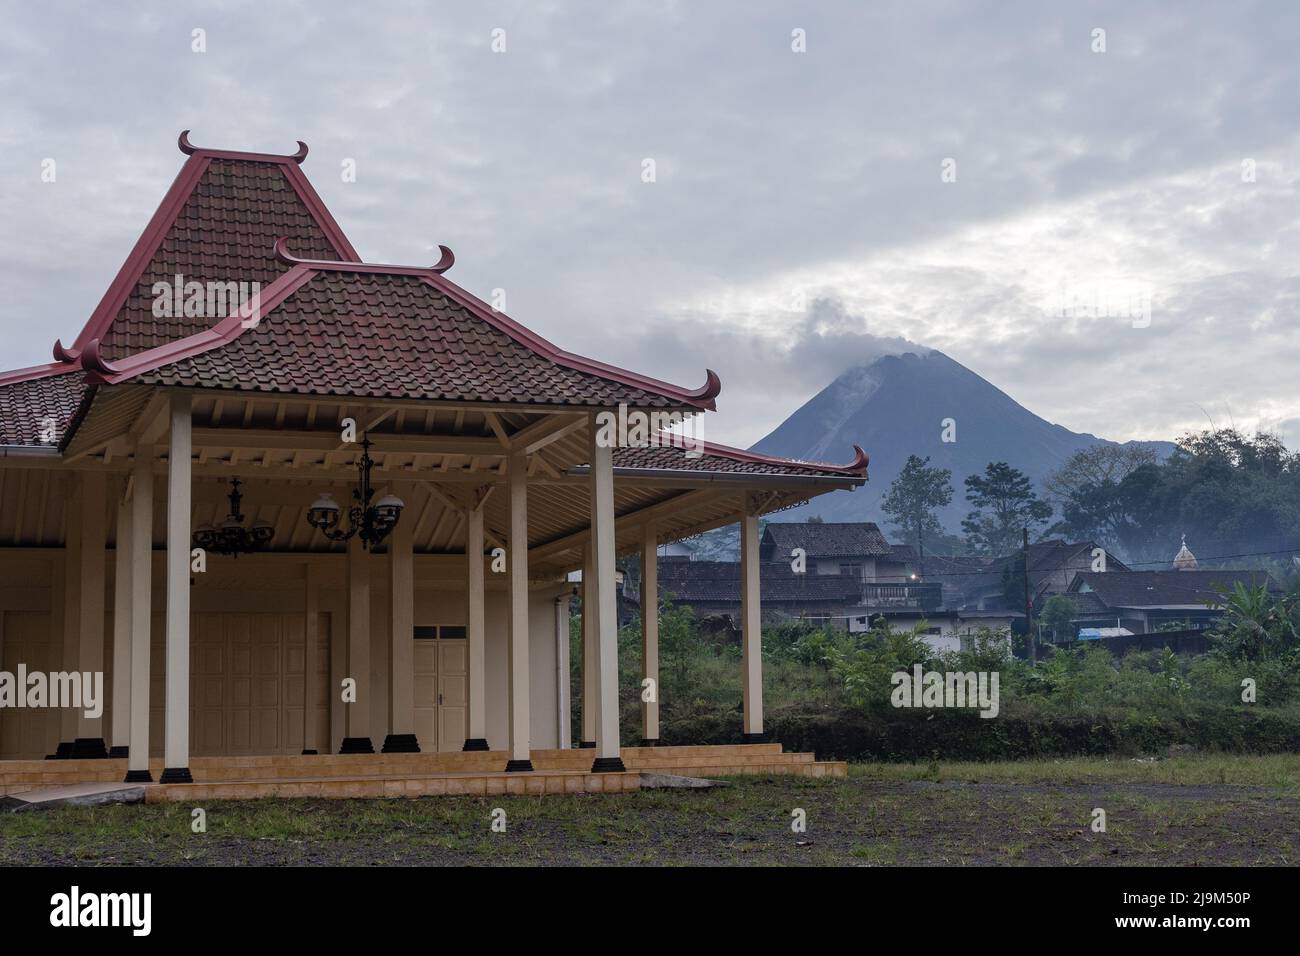 Mount Merapi spews volcanic ashes and materials as seen from Girikerto village in Sleman, Yogyakarta, Indonesia with Joglo Pendopo building. Stock Photo